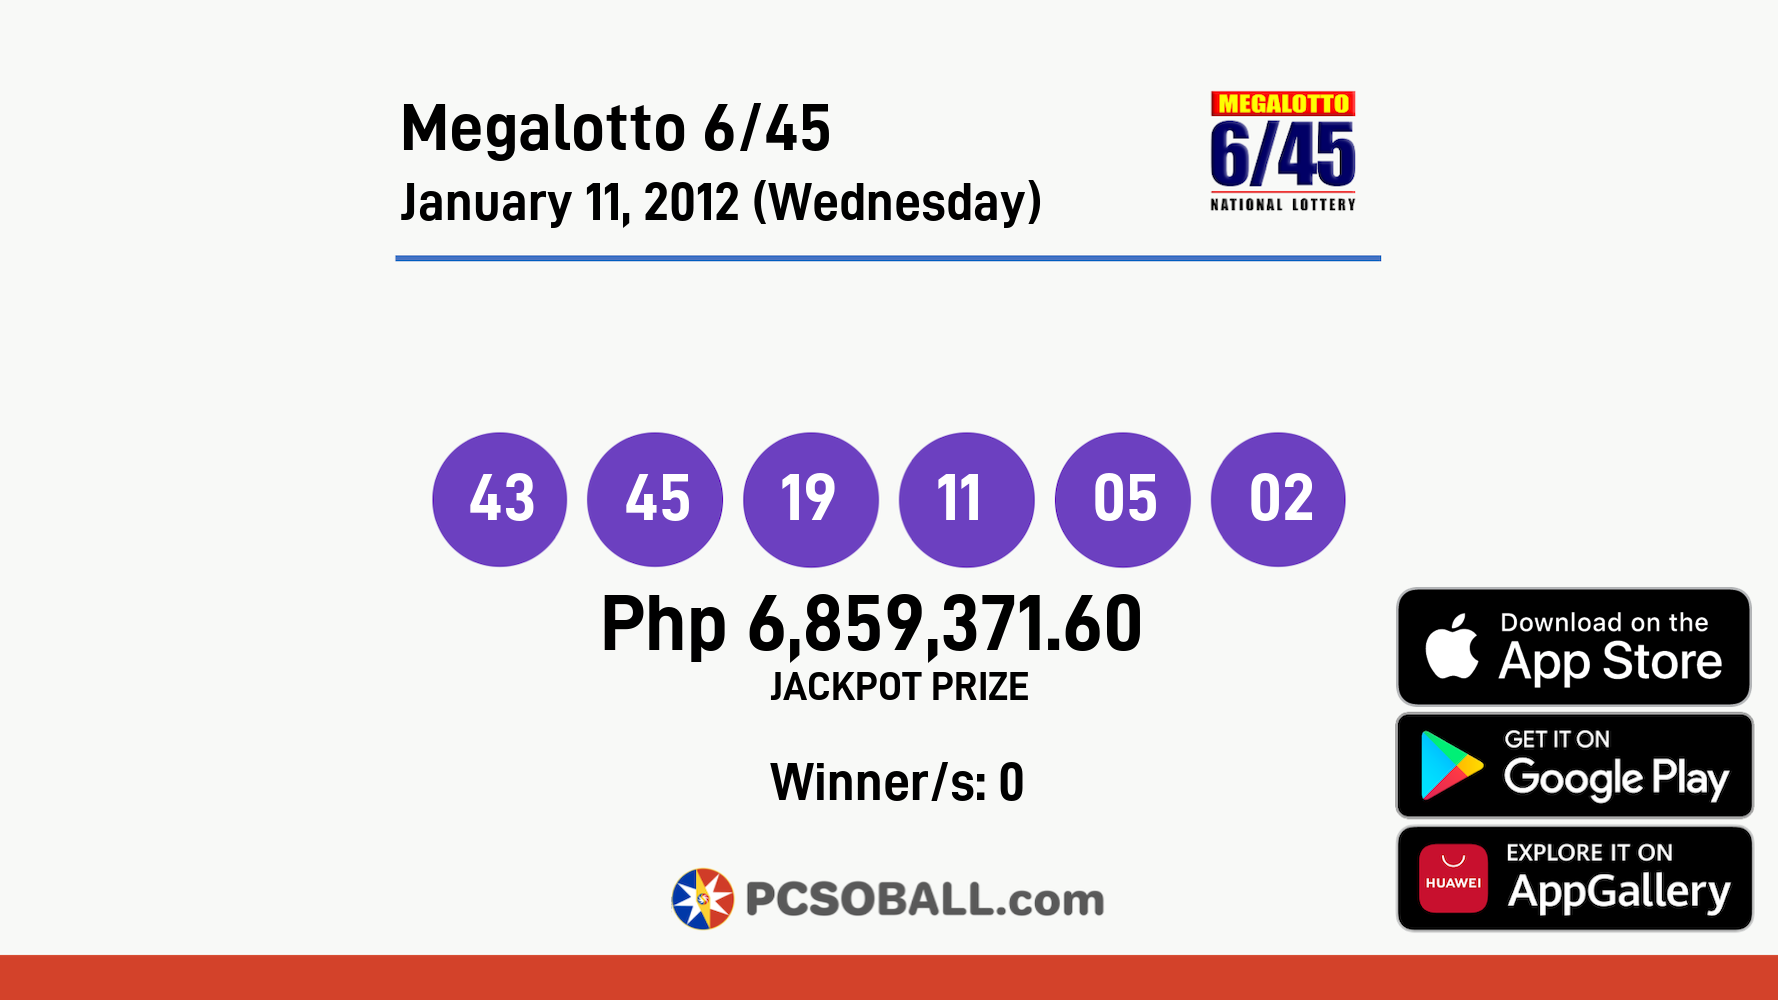 Megalotto 6/45 January 11, 2012 (Wednesday) Result